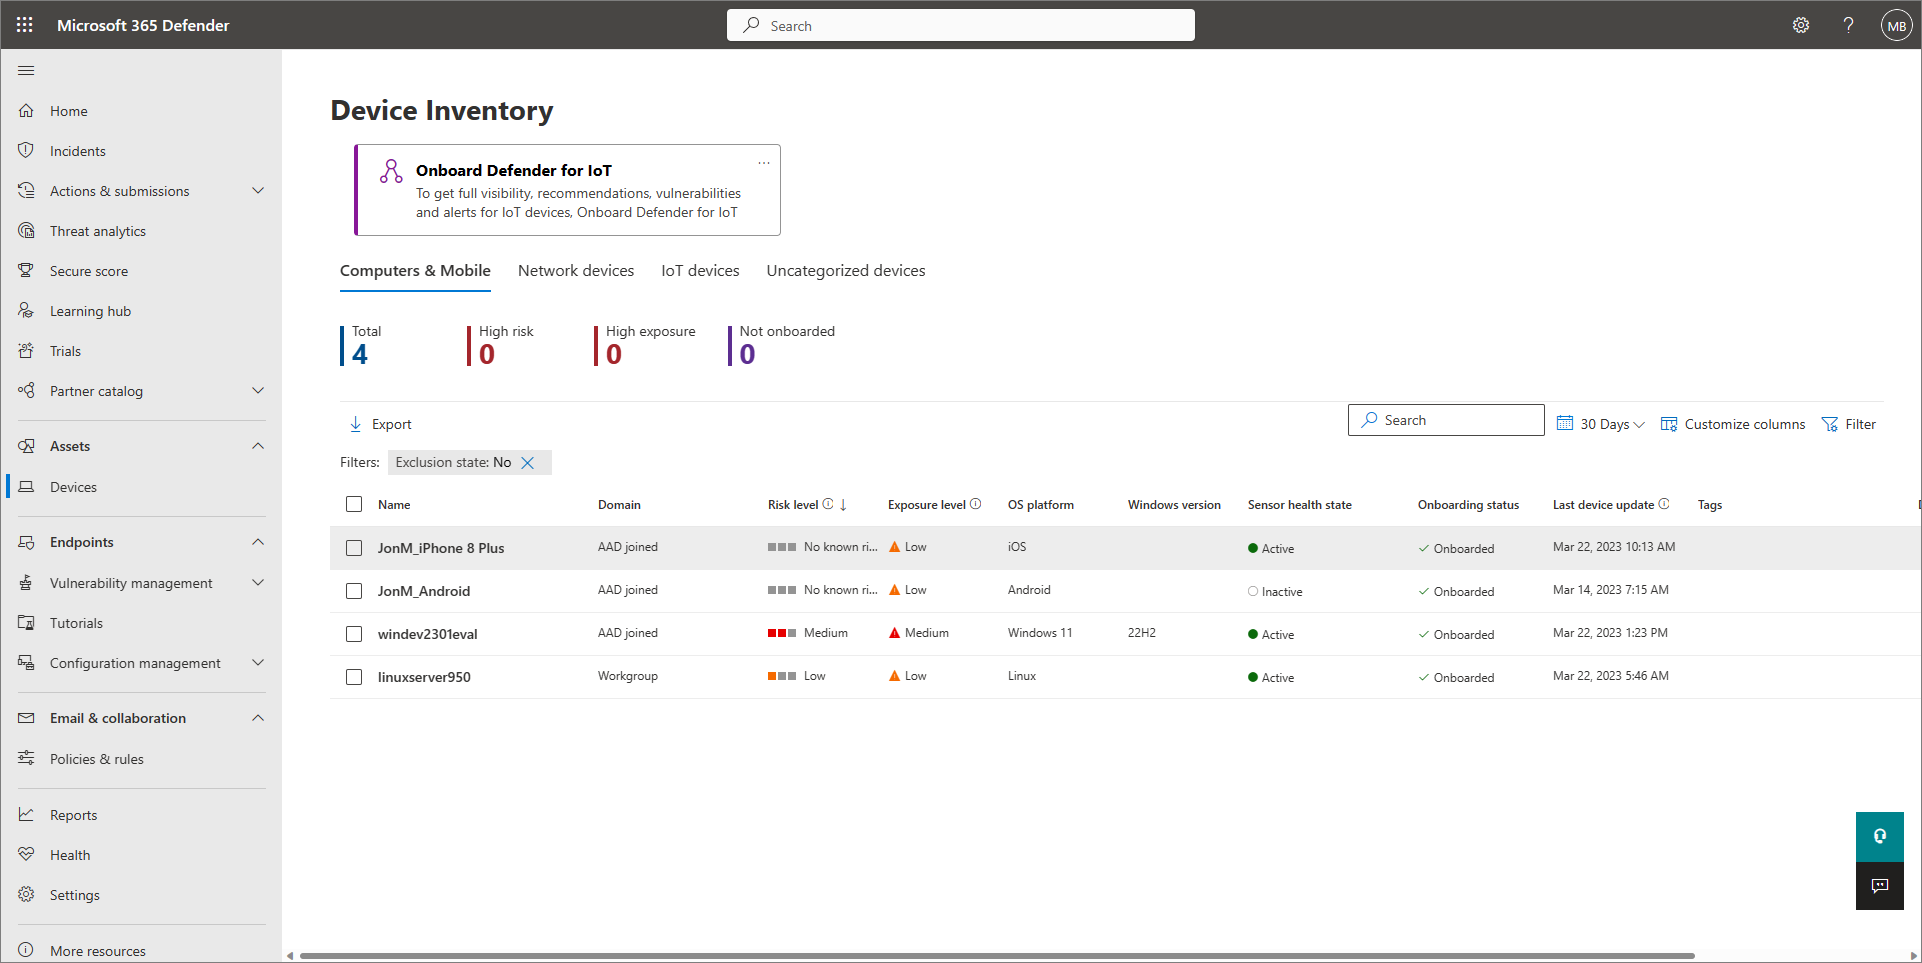 Screenshot of the device inventory report in Defender for Business.